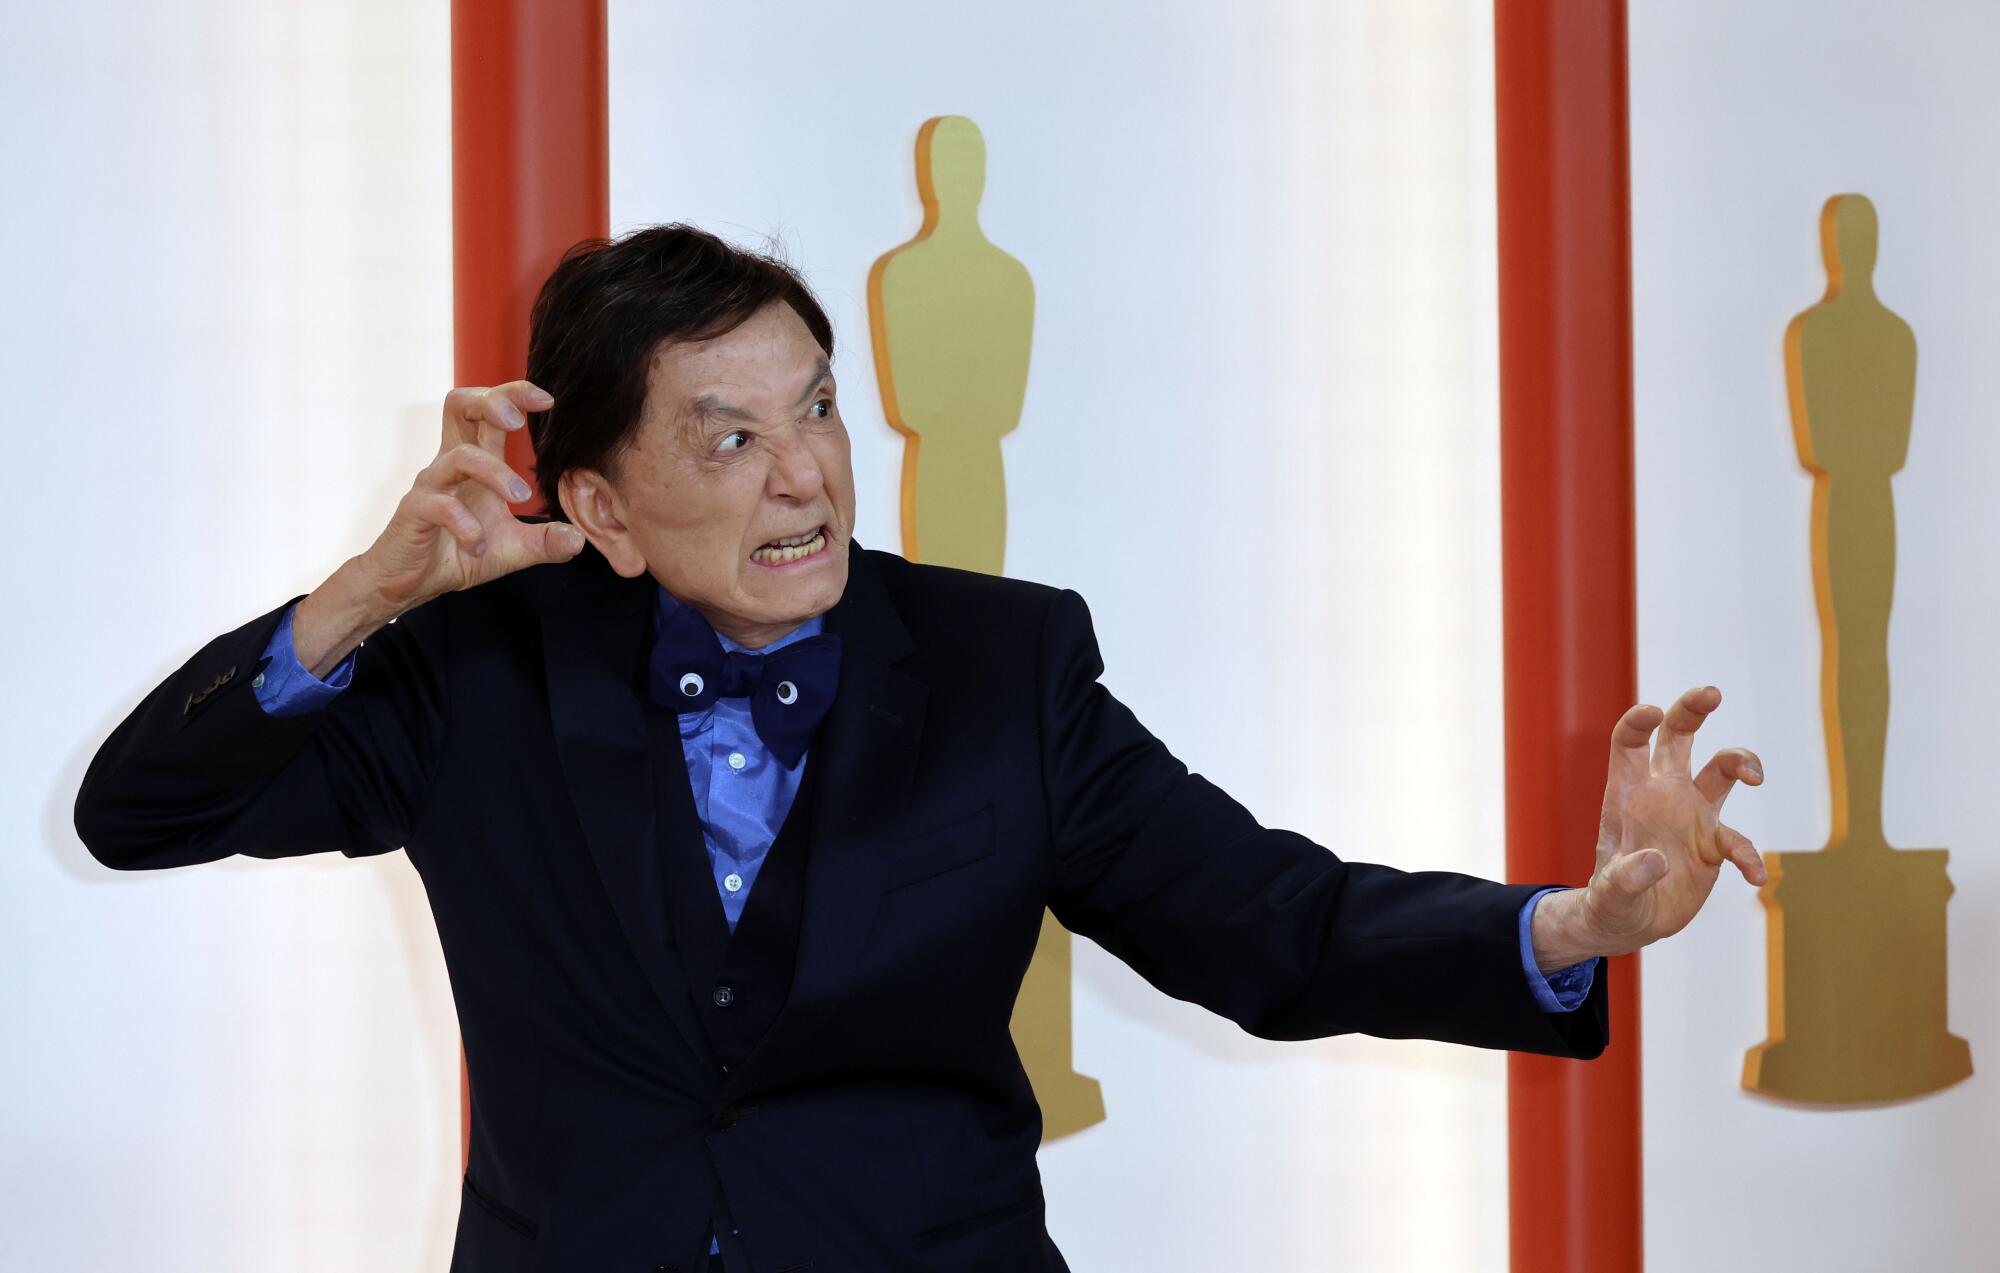 James Hong, in a black tux, with googly eyes on his bow tie, assumes an aggressive martial arts pose.